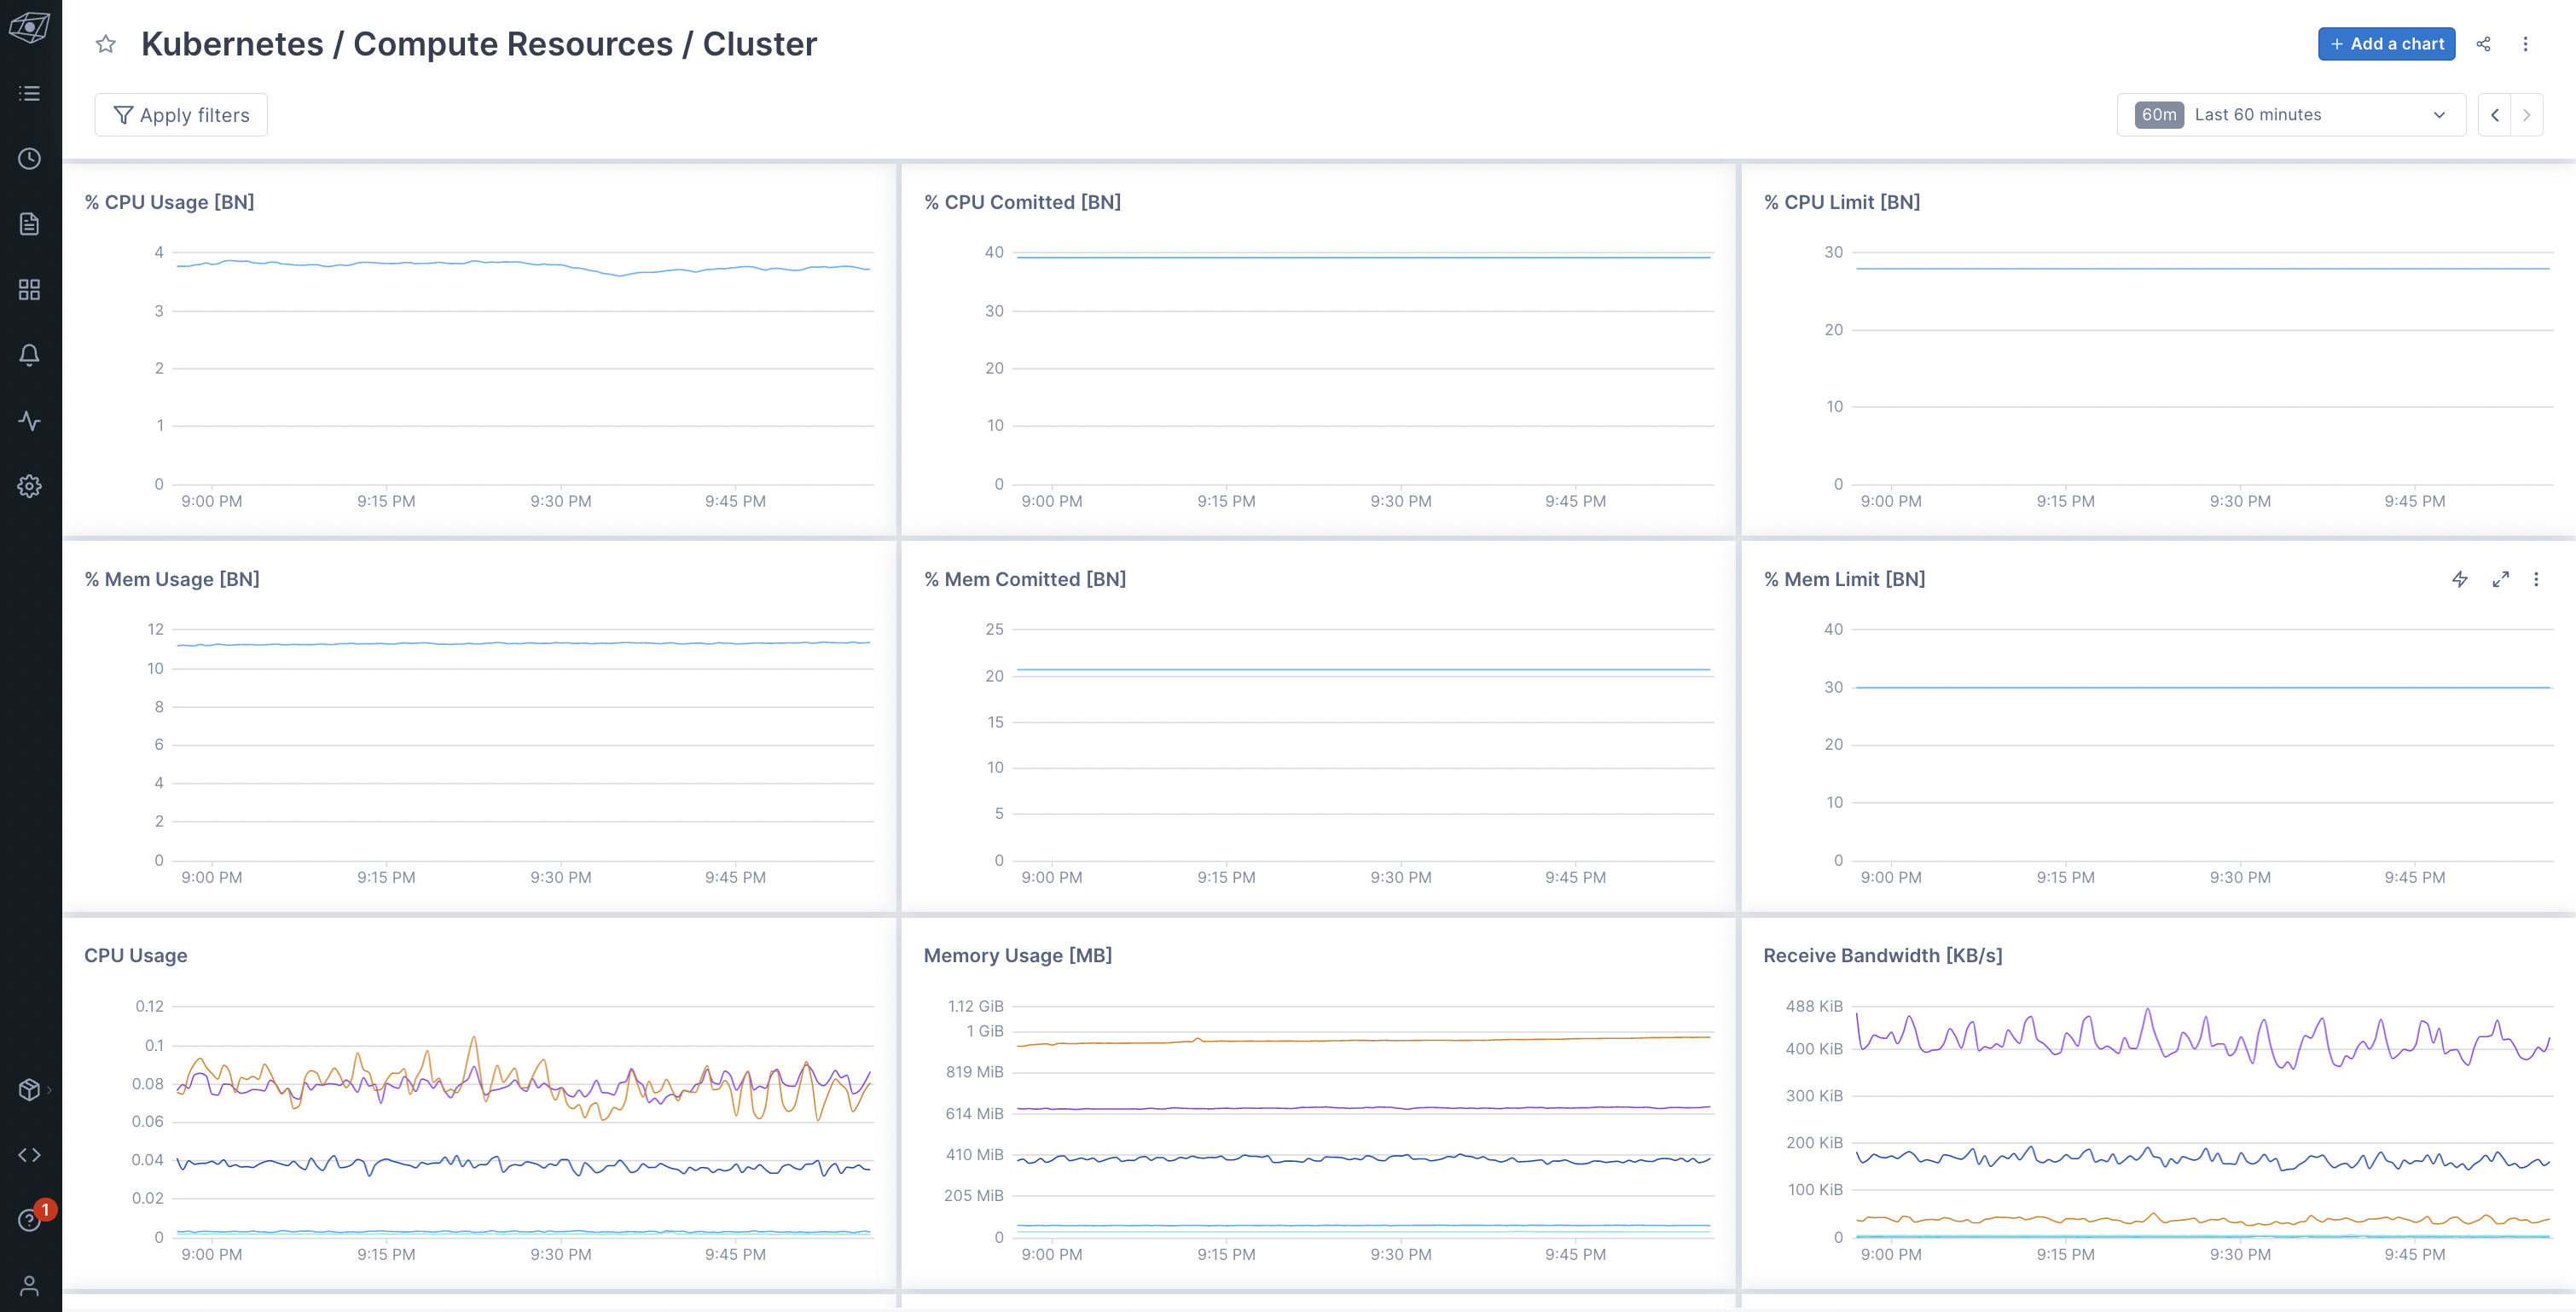 Kubernetes Compute Resources Cluster Dashboard